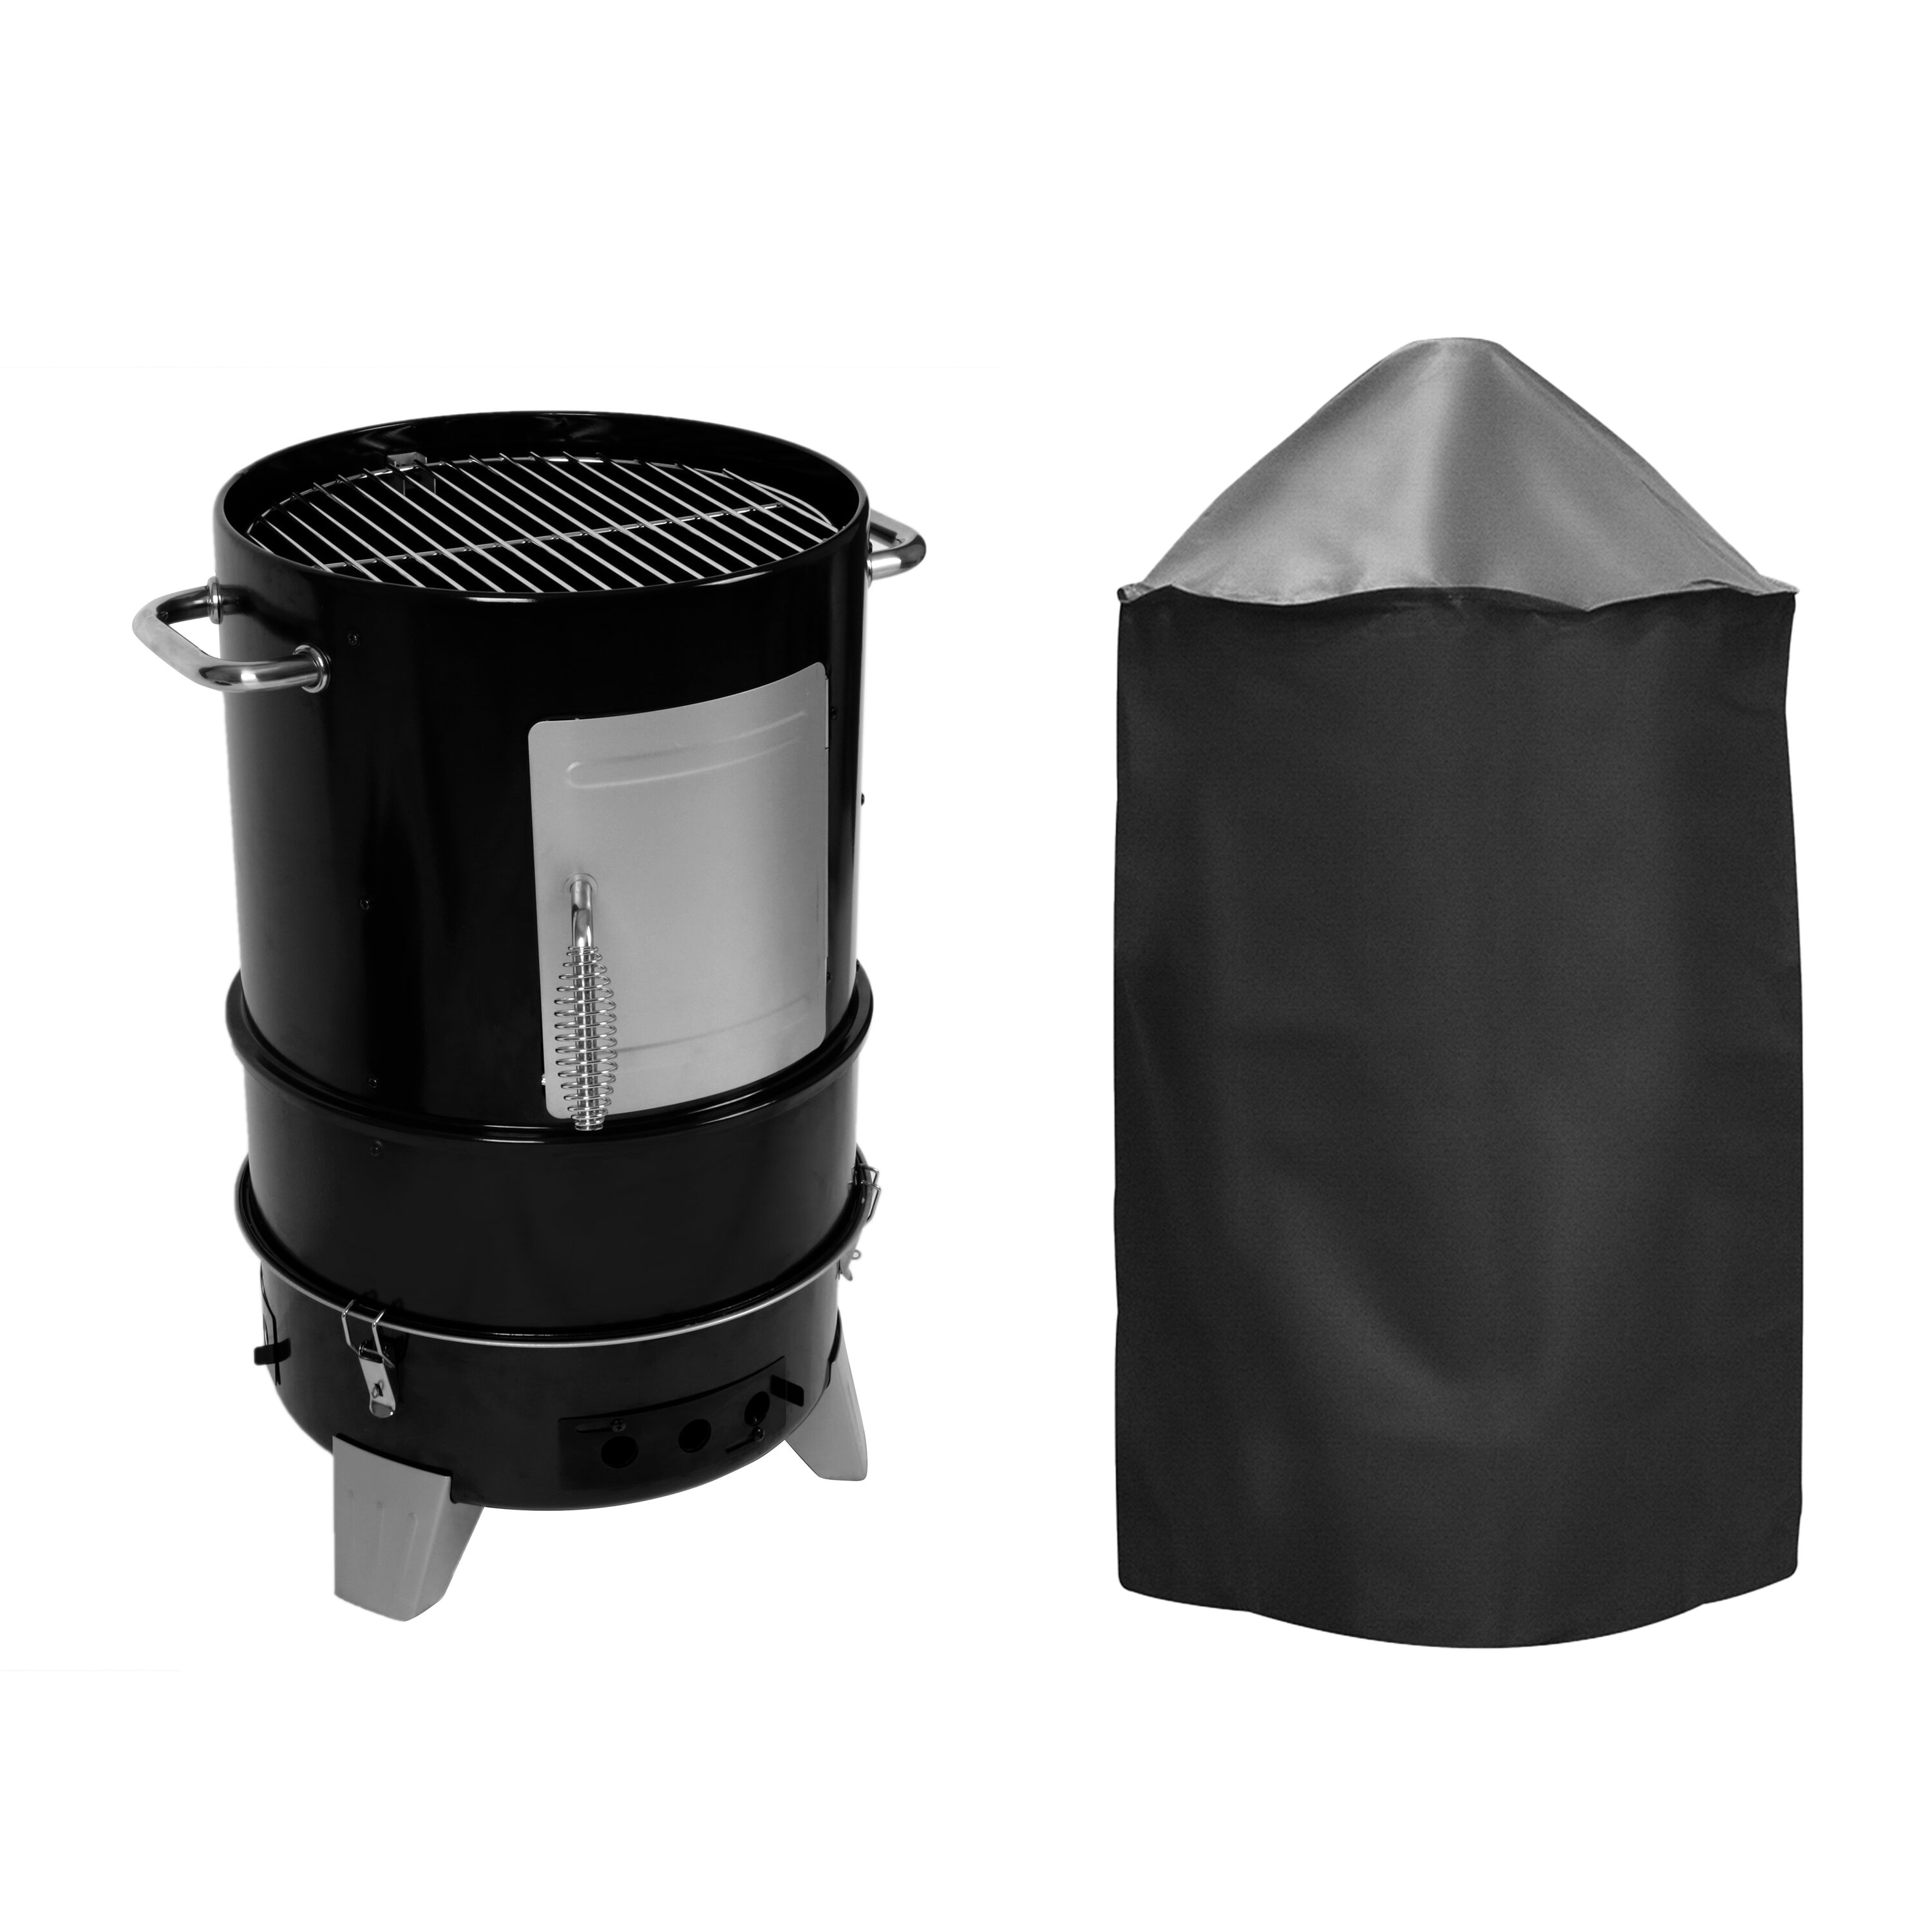 Master Forge Universal Vertical Smoker Kettle Grill 27.5-in W x 35